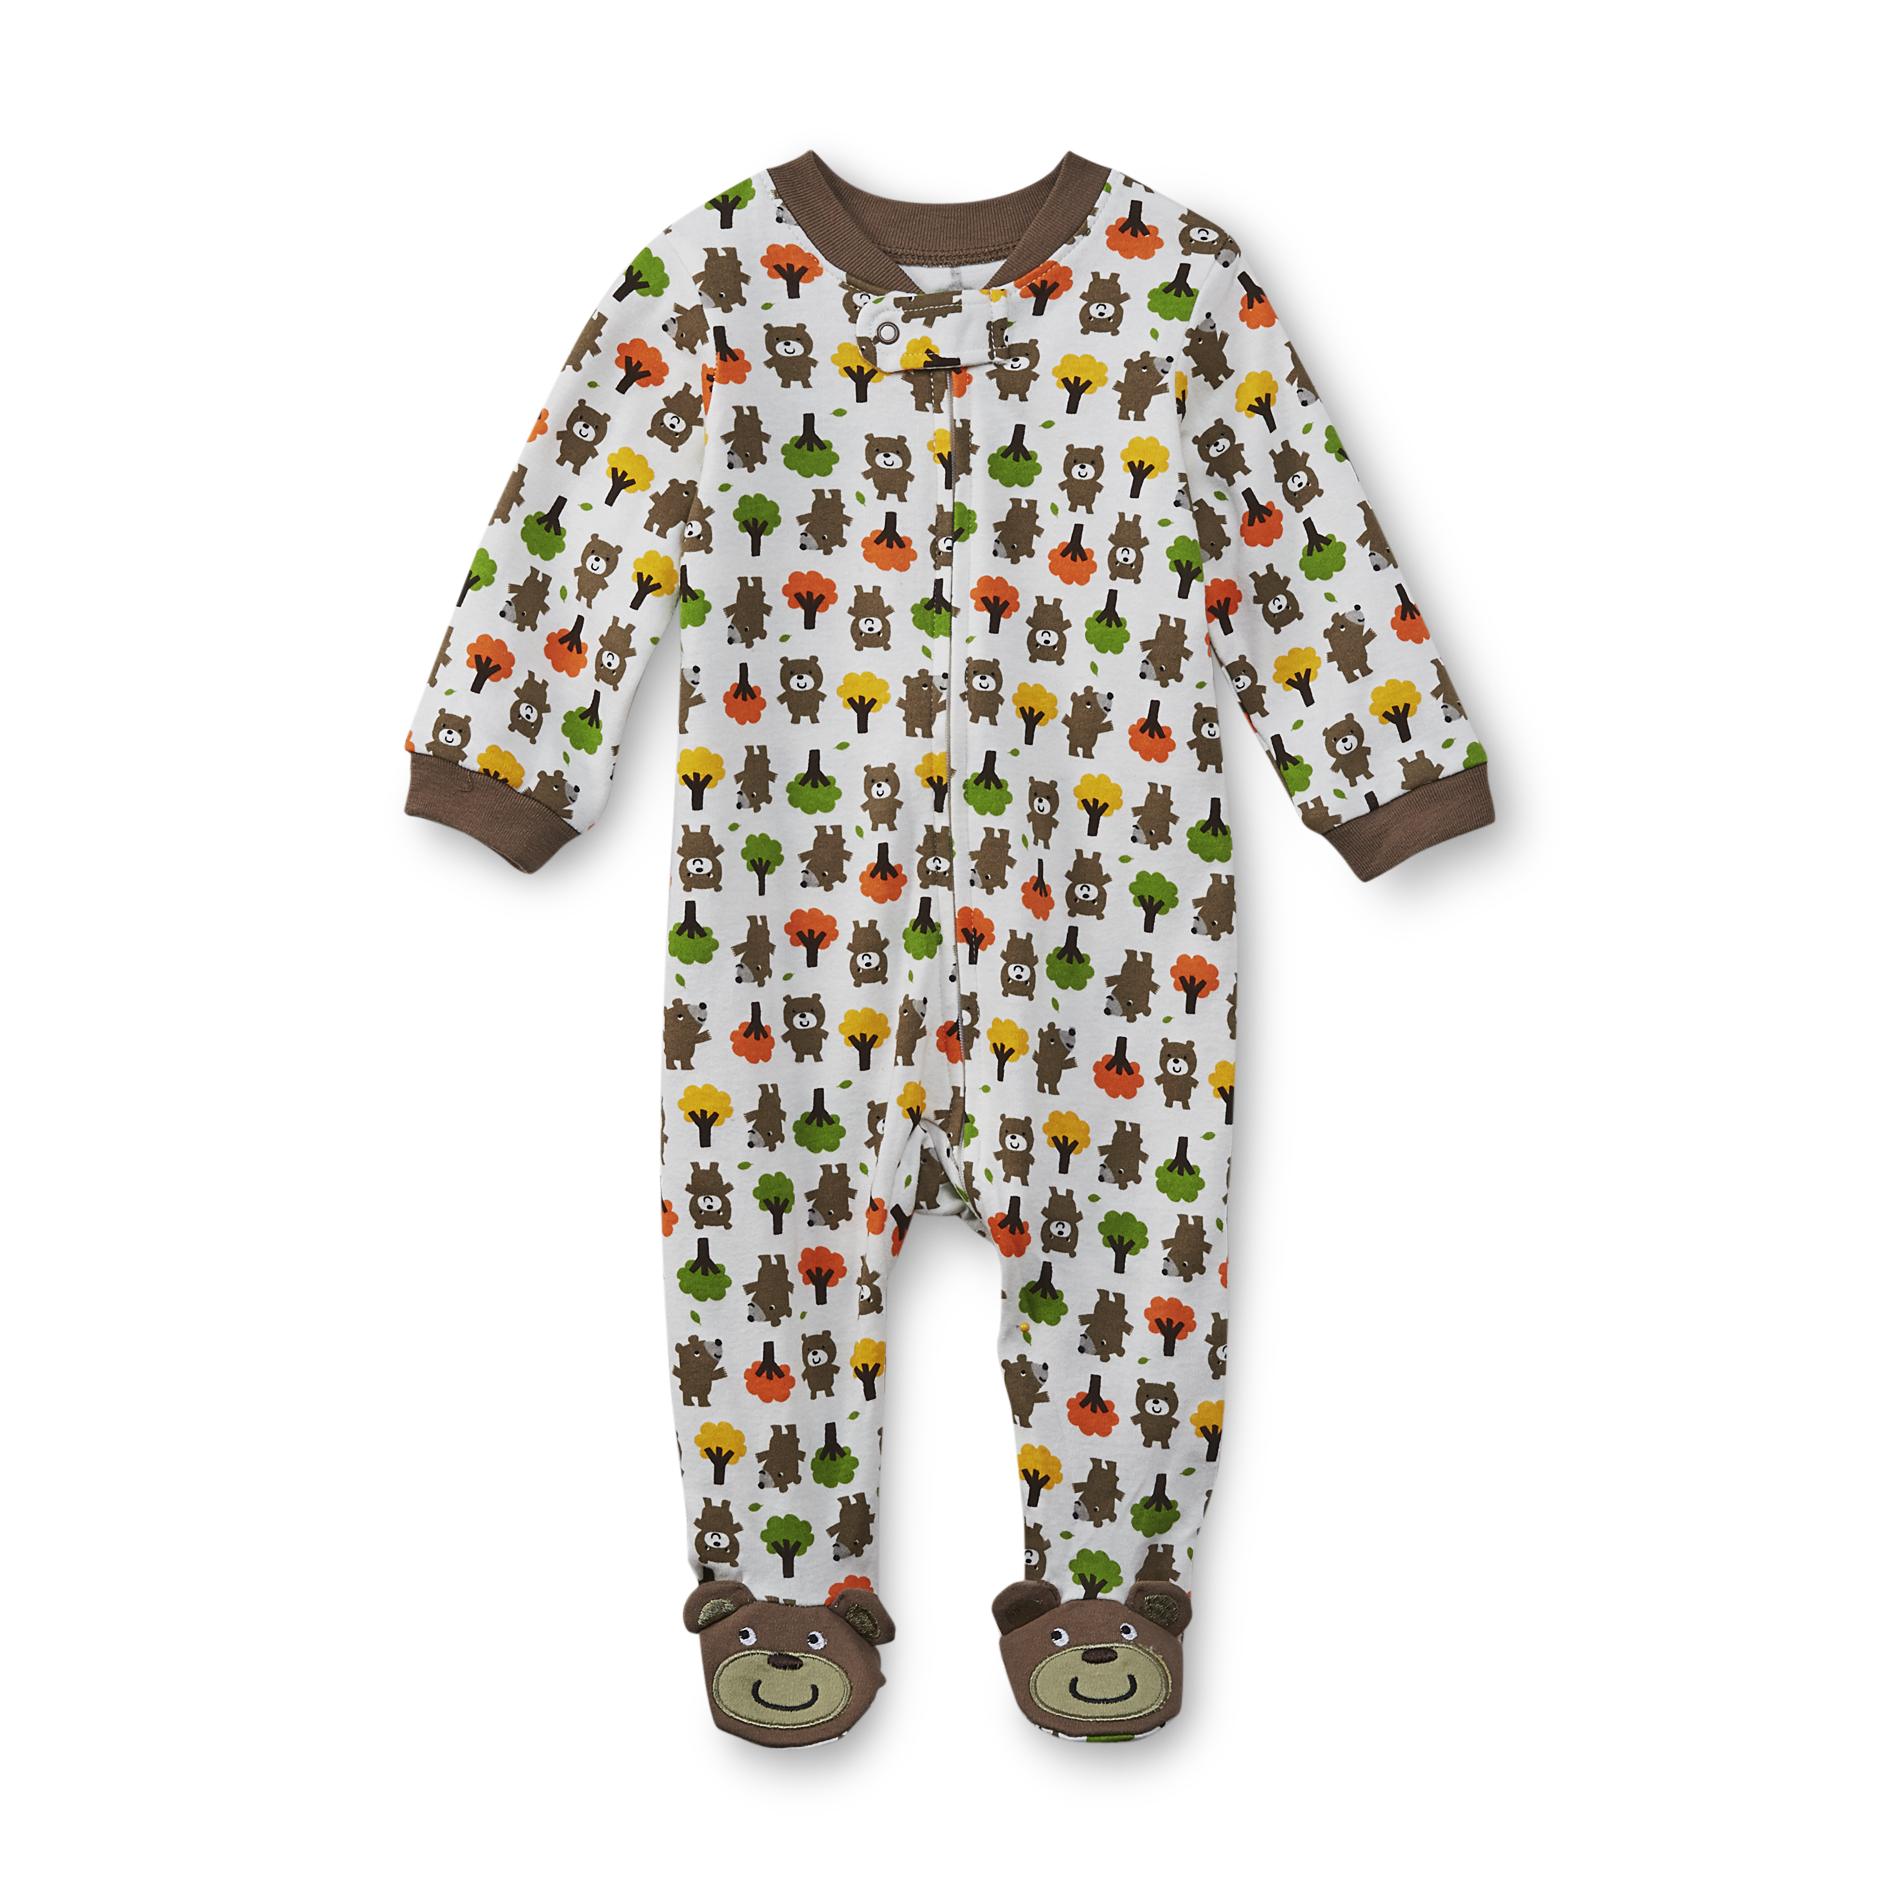 Small Wonders Infant Boy's Footed Pajamas - Bears